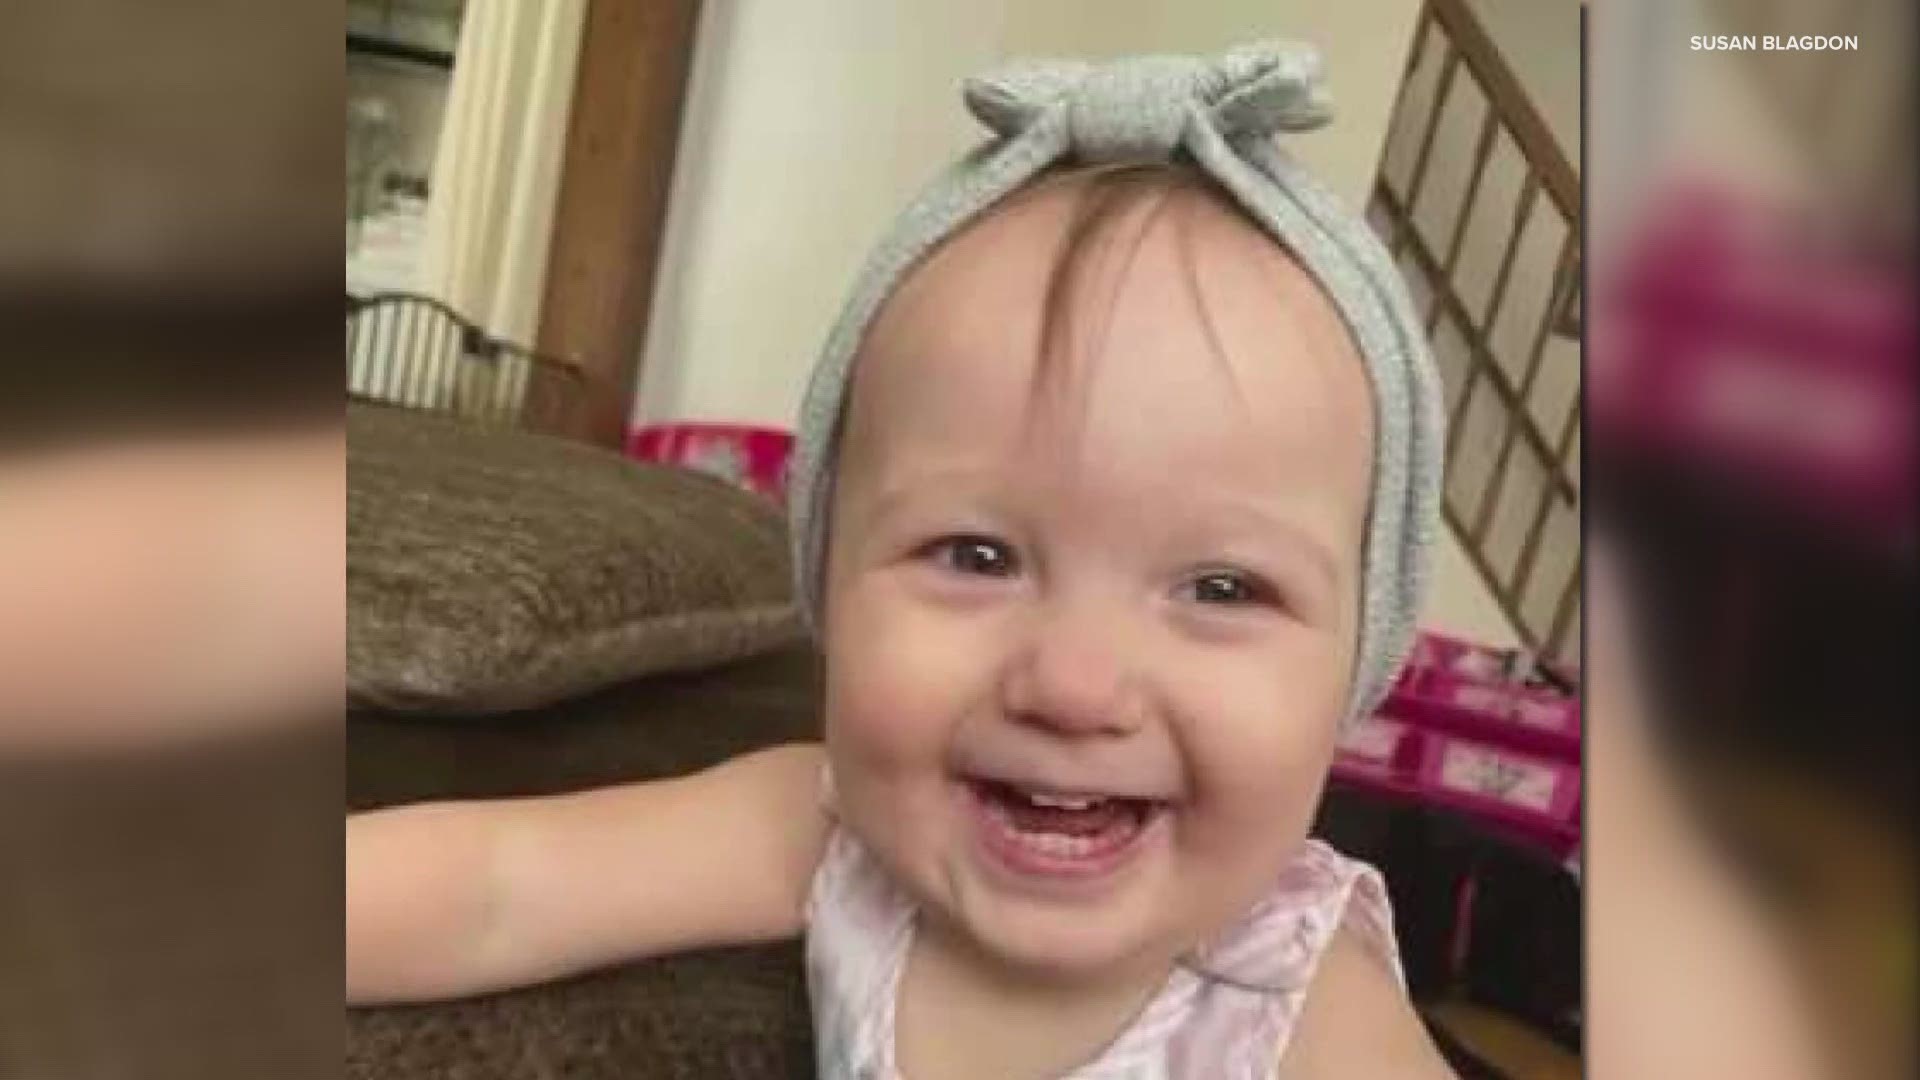 According to police, 19 month-old Raegan Blagdon suffered a traumatic brain injury due to lack of oxygen while she was at Lil' Beans Daycare in Windsor last month.